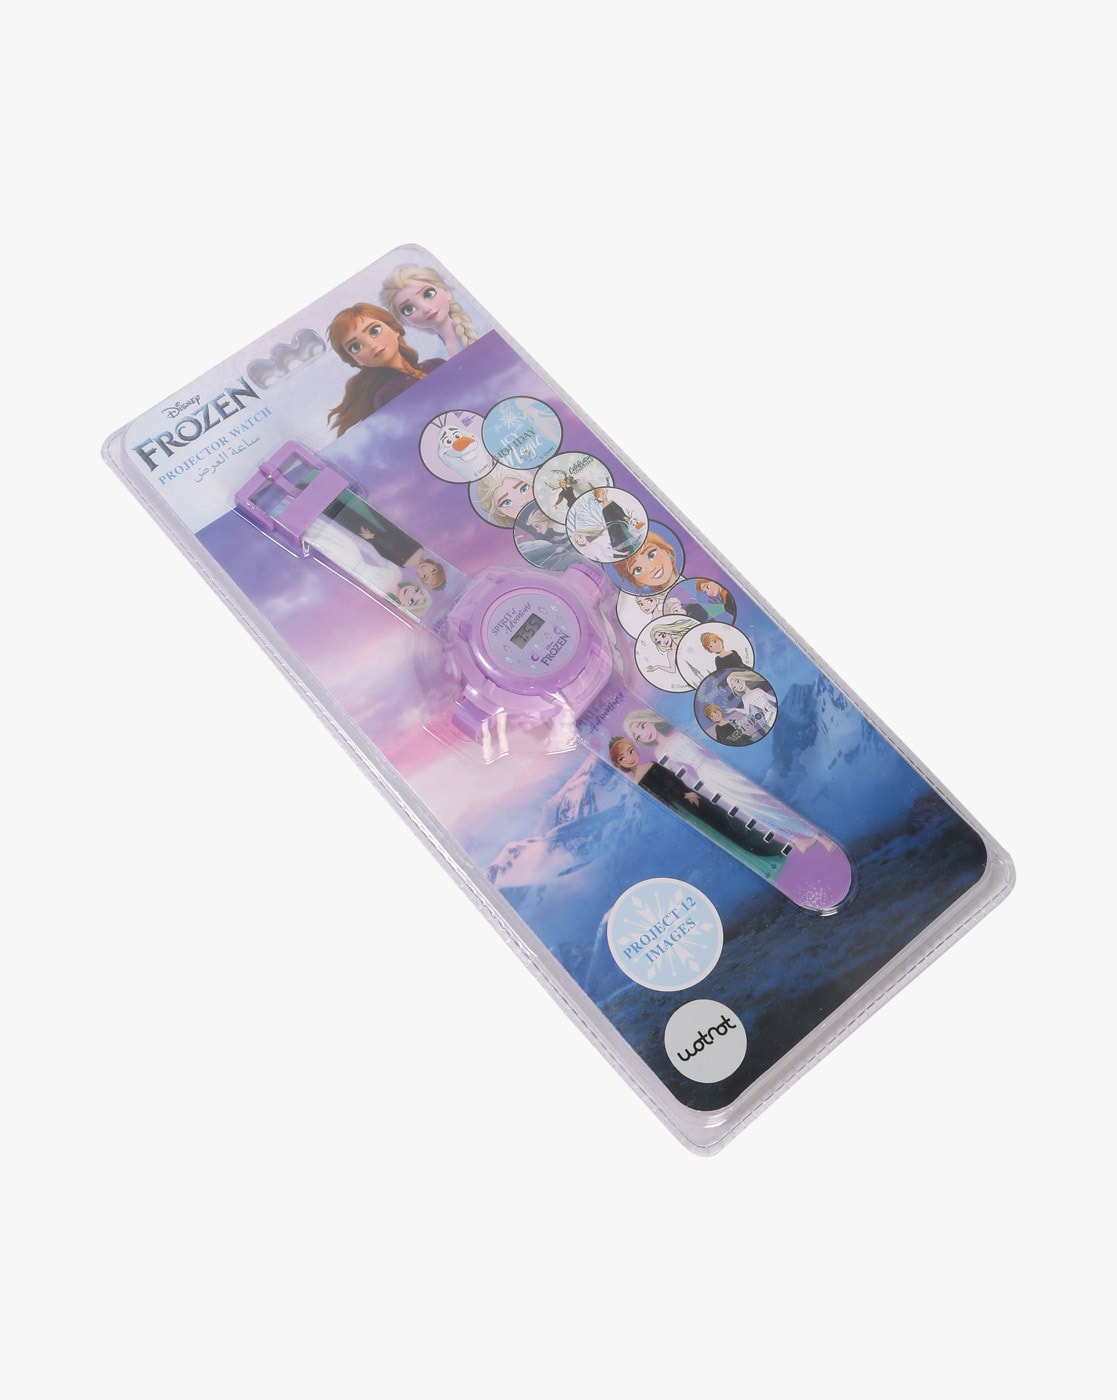 Frozen Watch Projection | Movies Watch Disney | Character Frozen | Frozen  Toys Gifts - Action Figures - Aliexpress